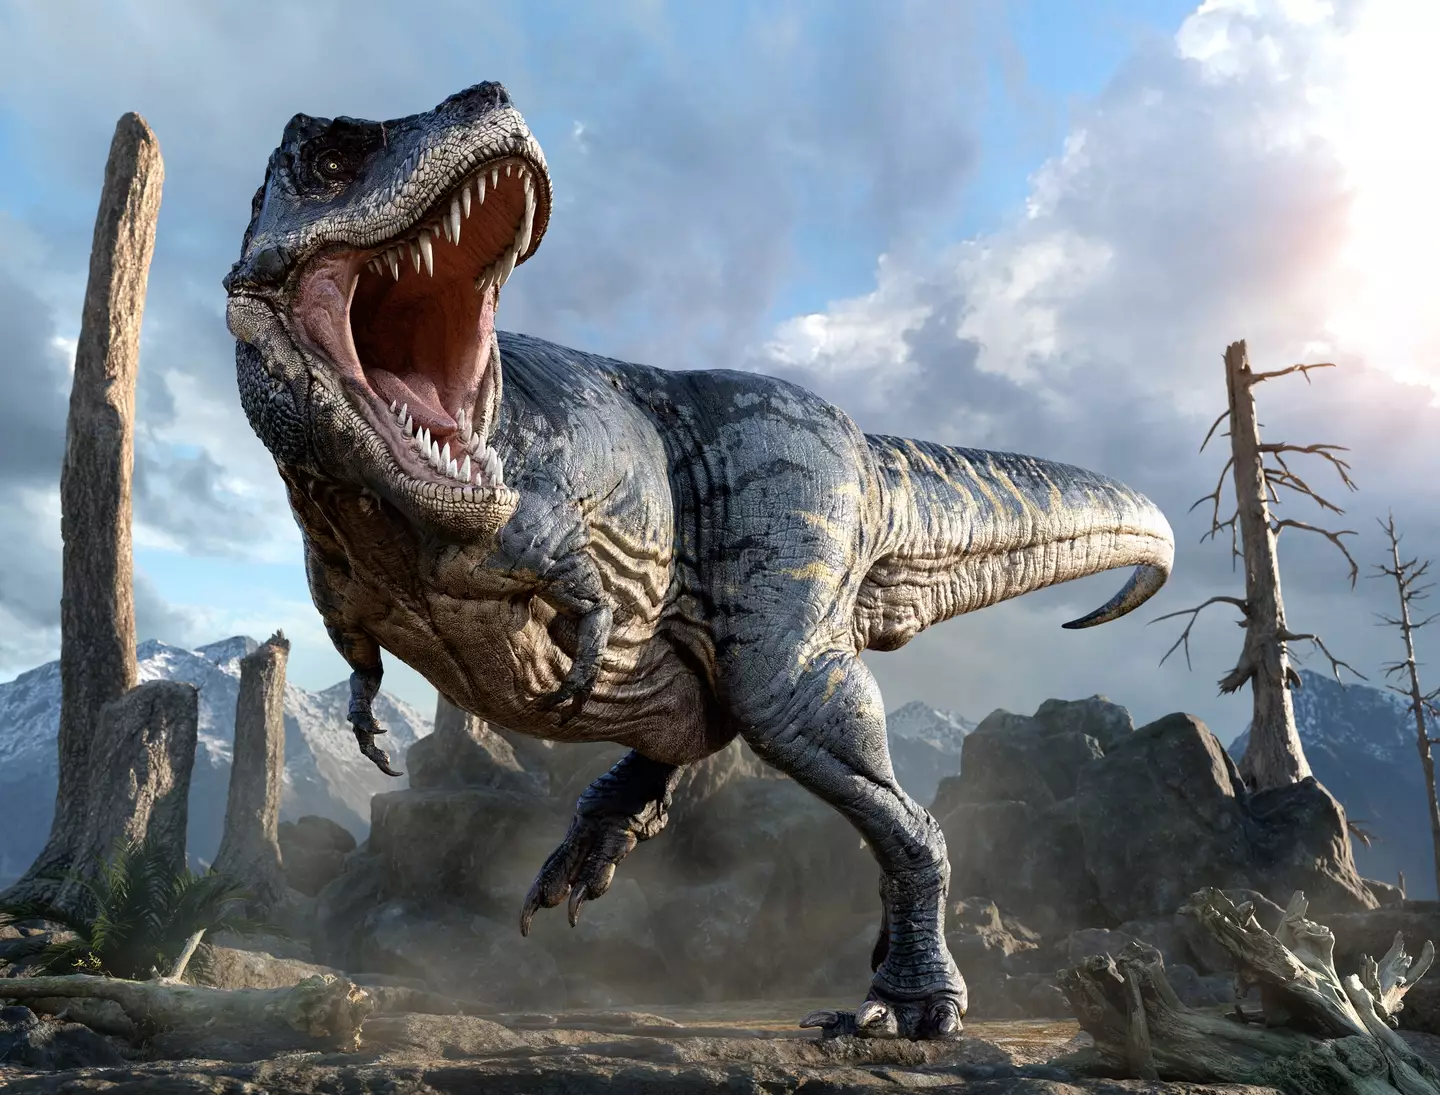 A T-Rex may have sounded like a bird/ crocodile mix.